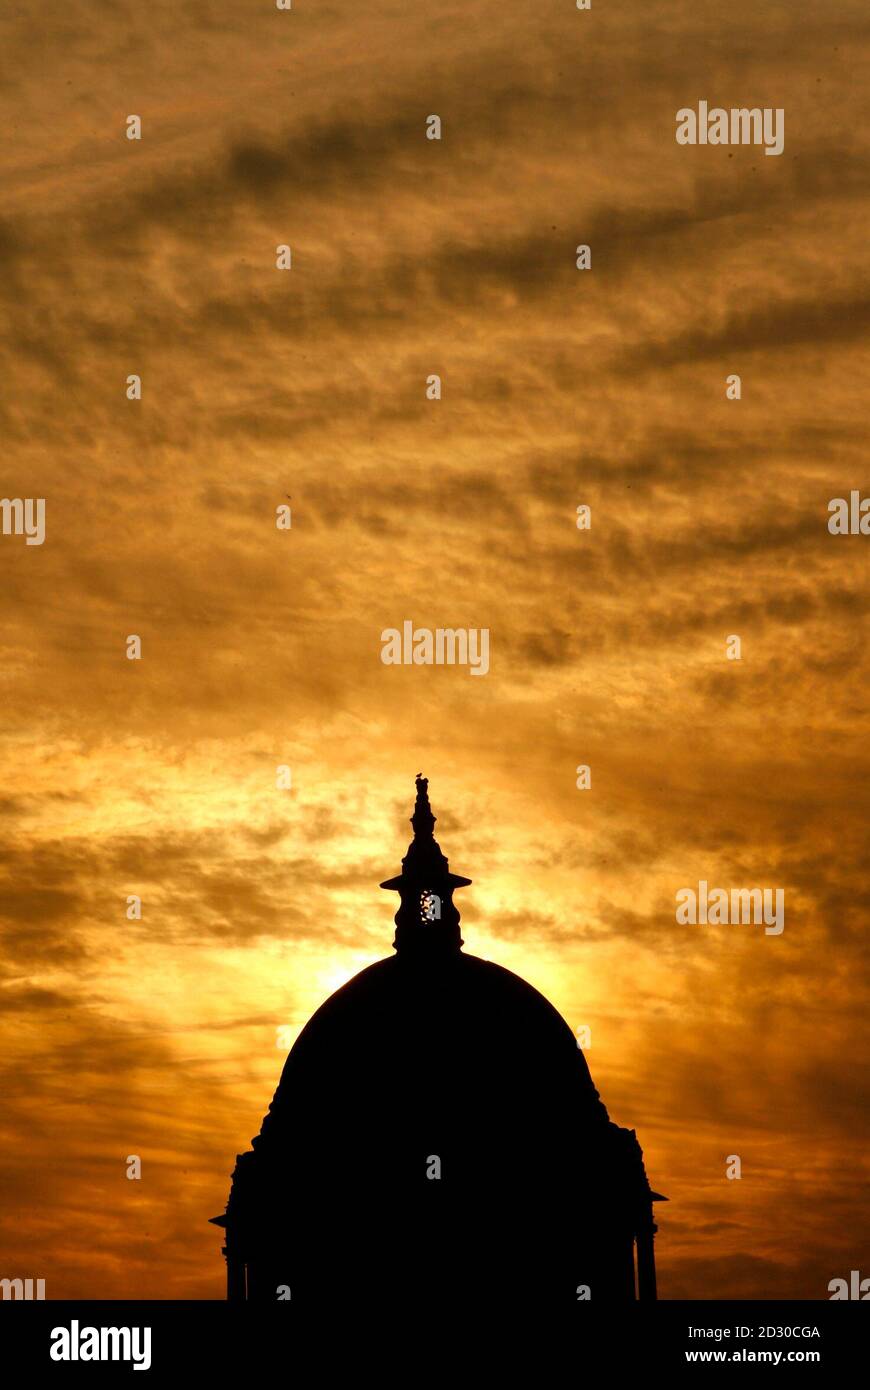 The dome of the Defence Ministry building is silhouetted against the setting sun in New Delhi December 31, 2007. REUTERS/Adnan Abidi (INDIA) Stock Photo